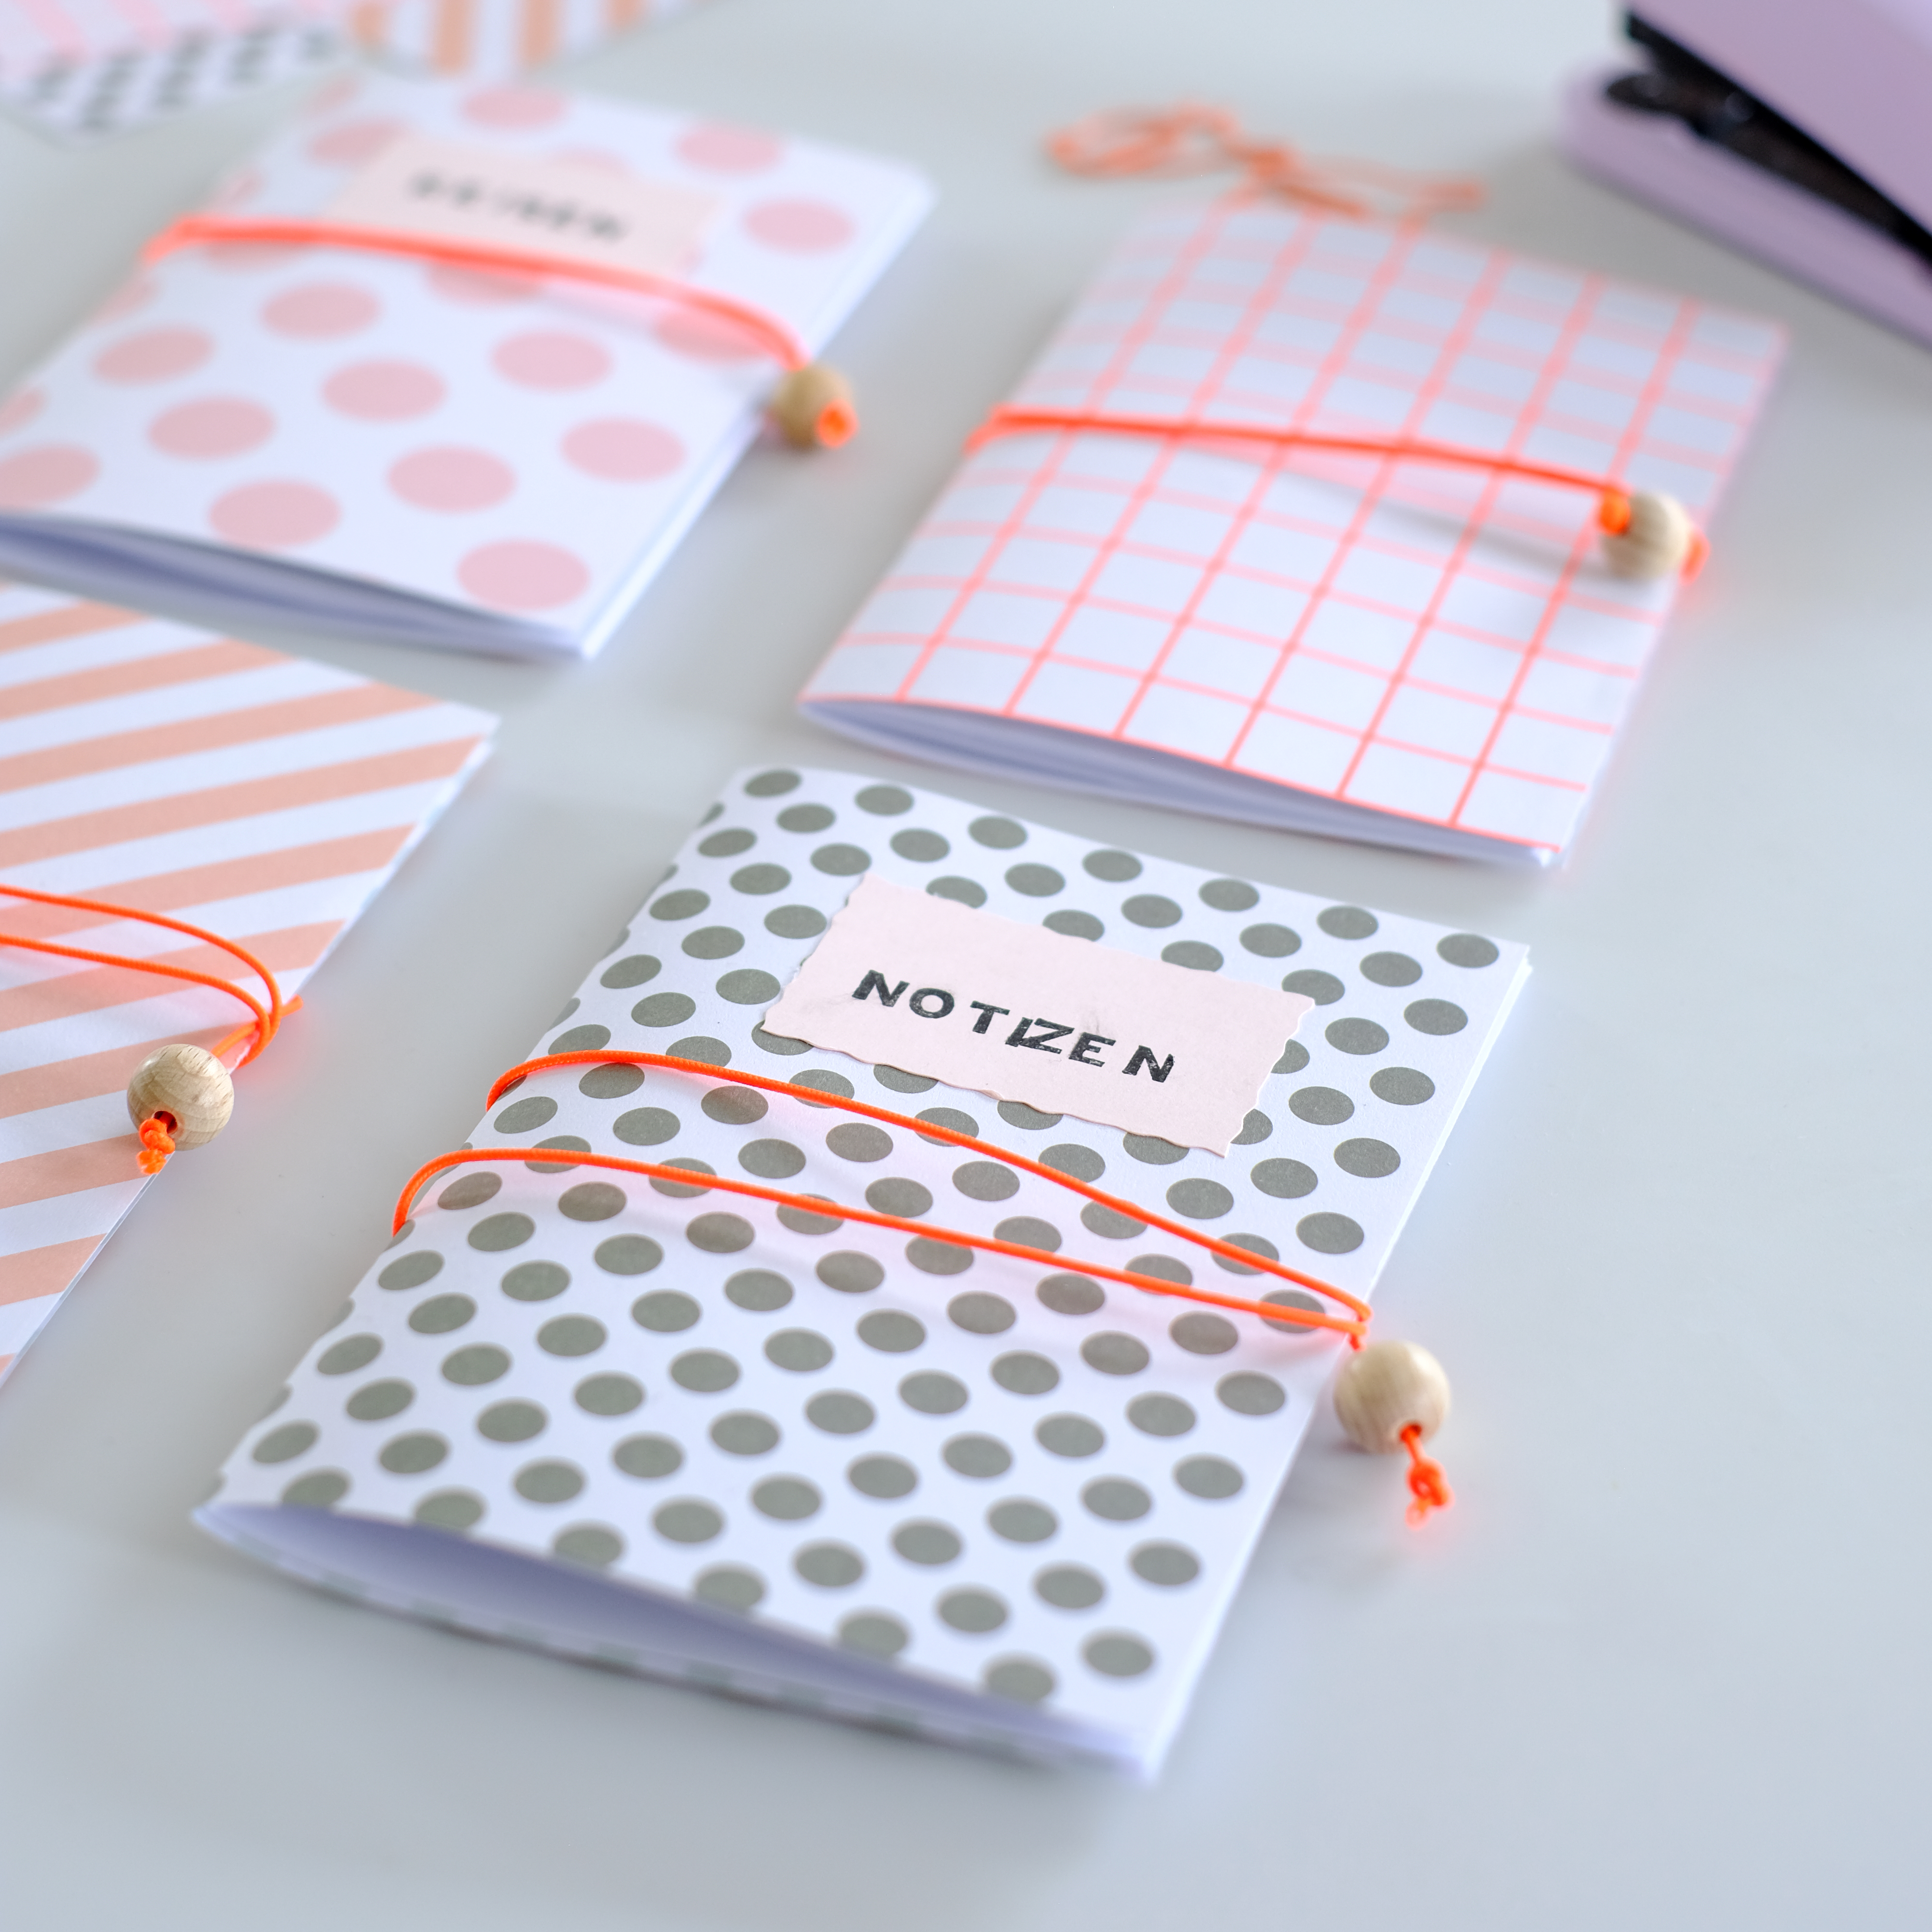 Make your own notebook